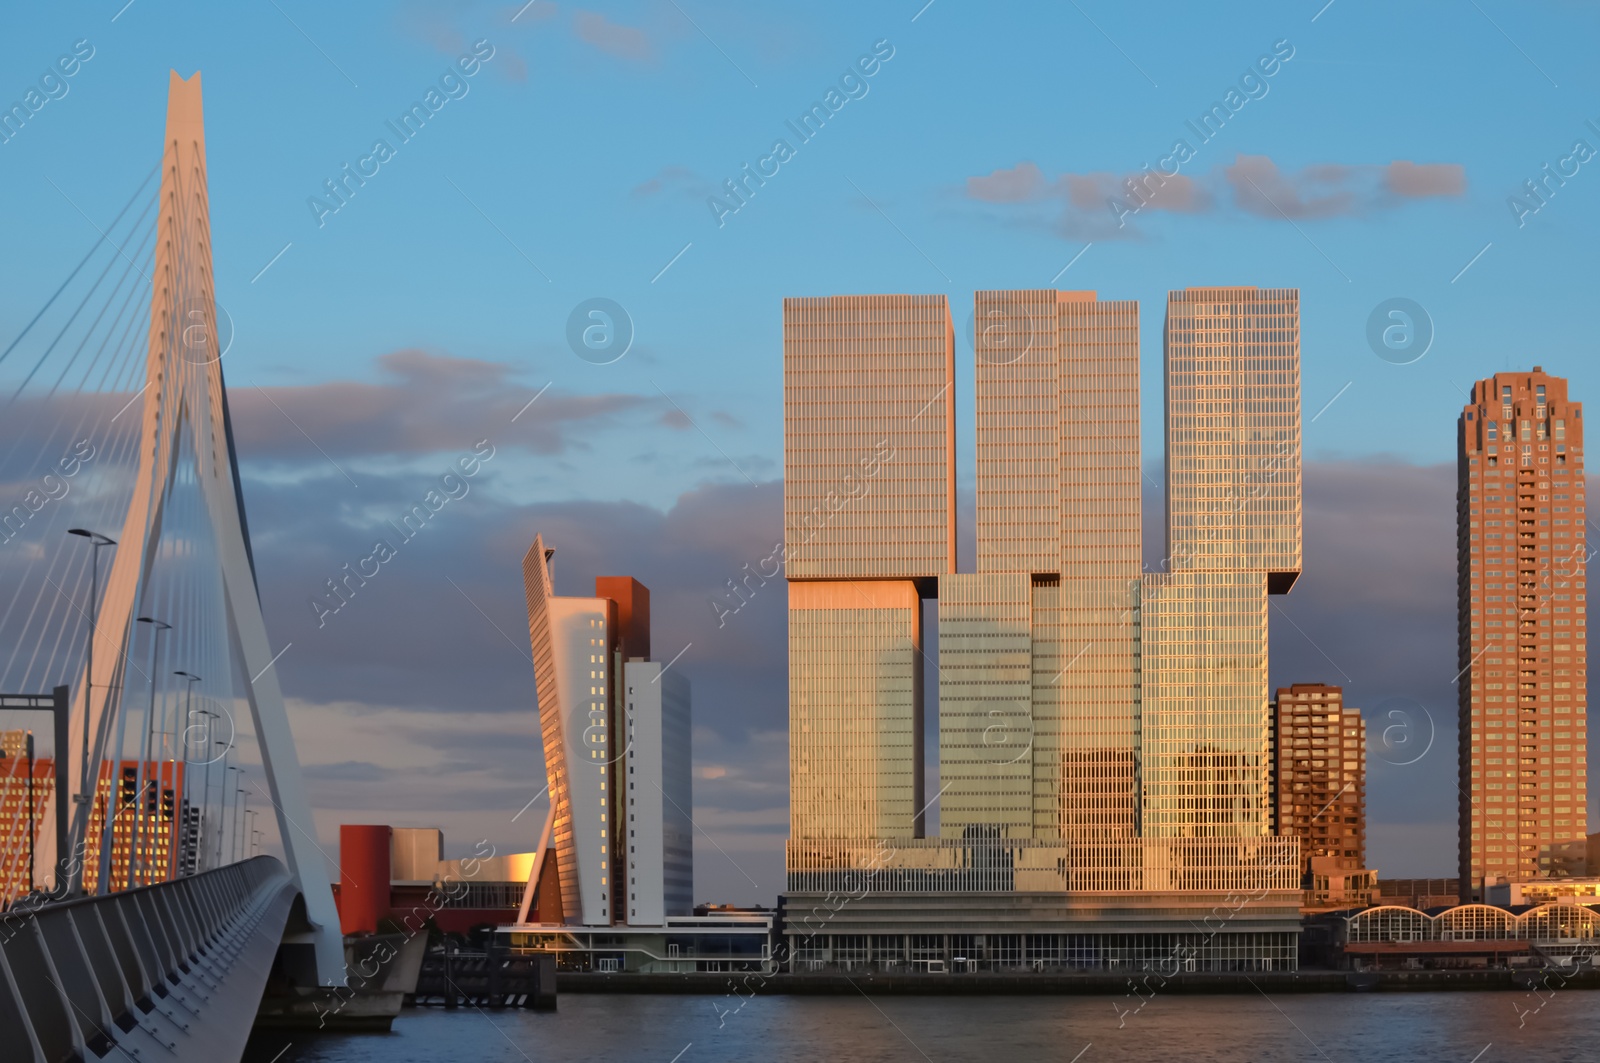 Photo of ROTTERDAM, NETHERLANDS - JUNE 16, 2019: Beautiful view of cityscape with famous De Rotterdam building